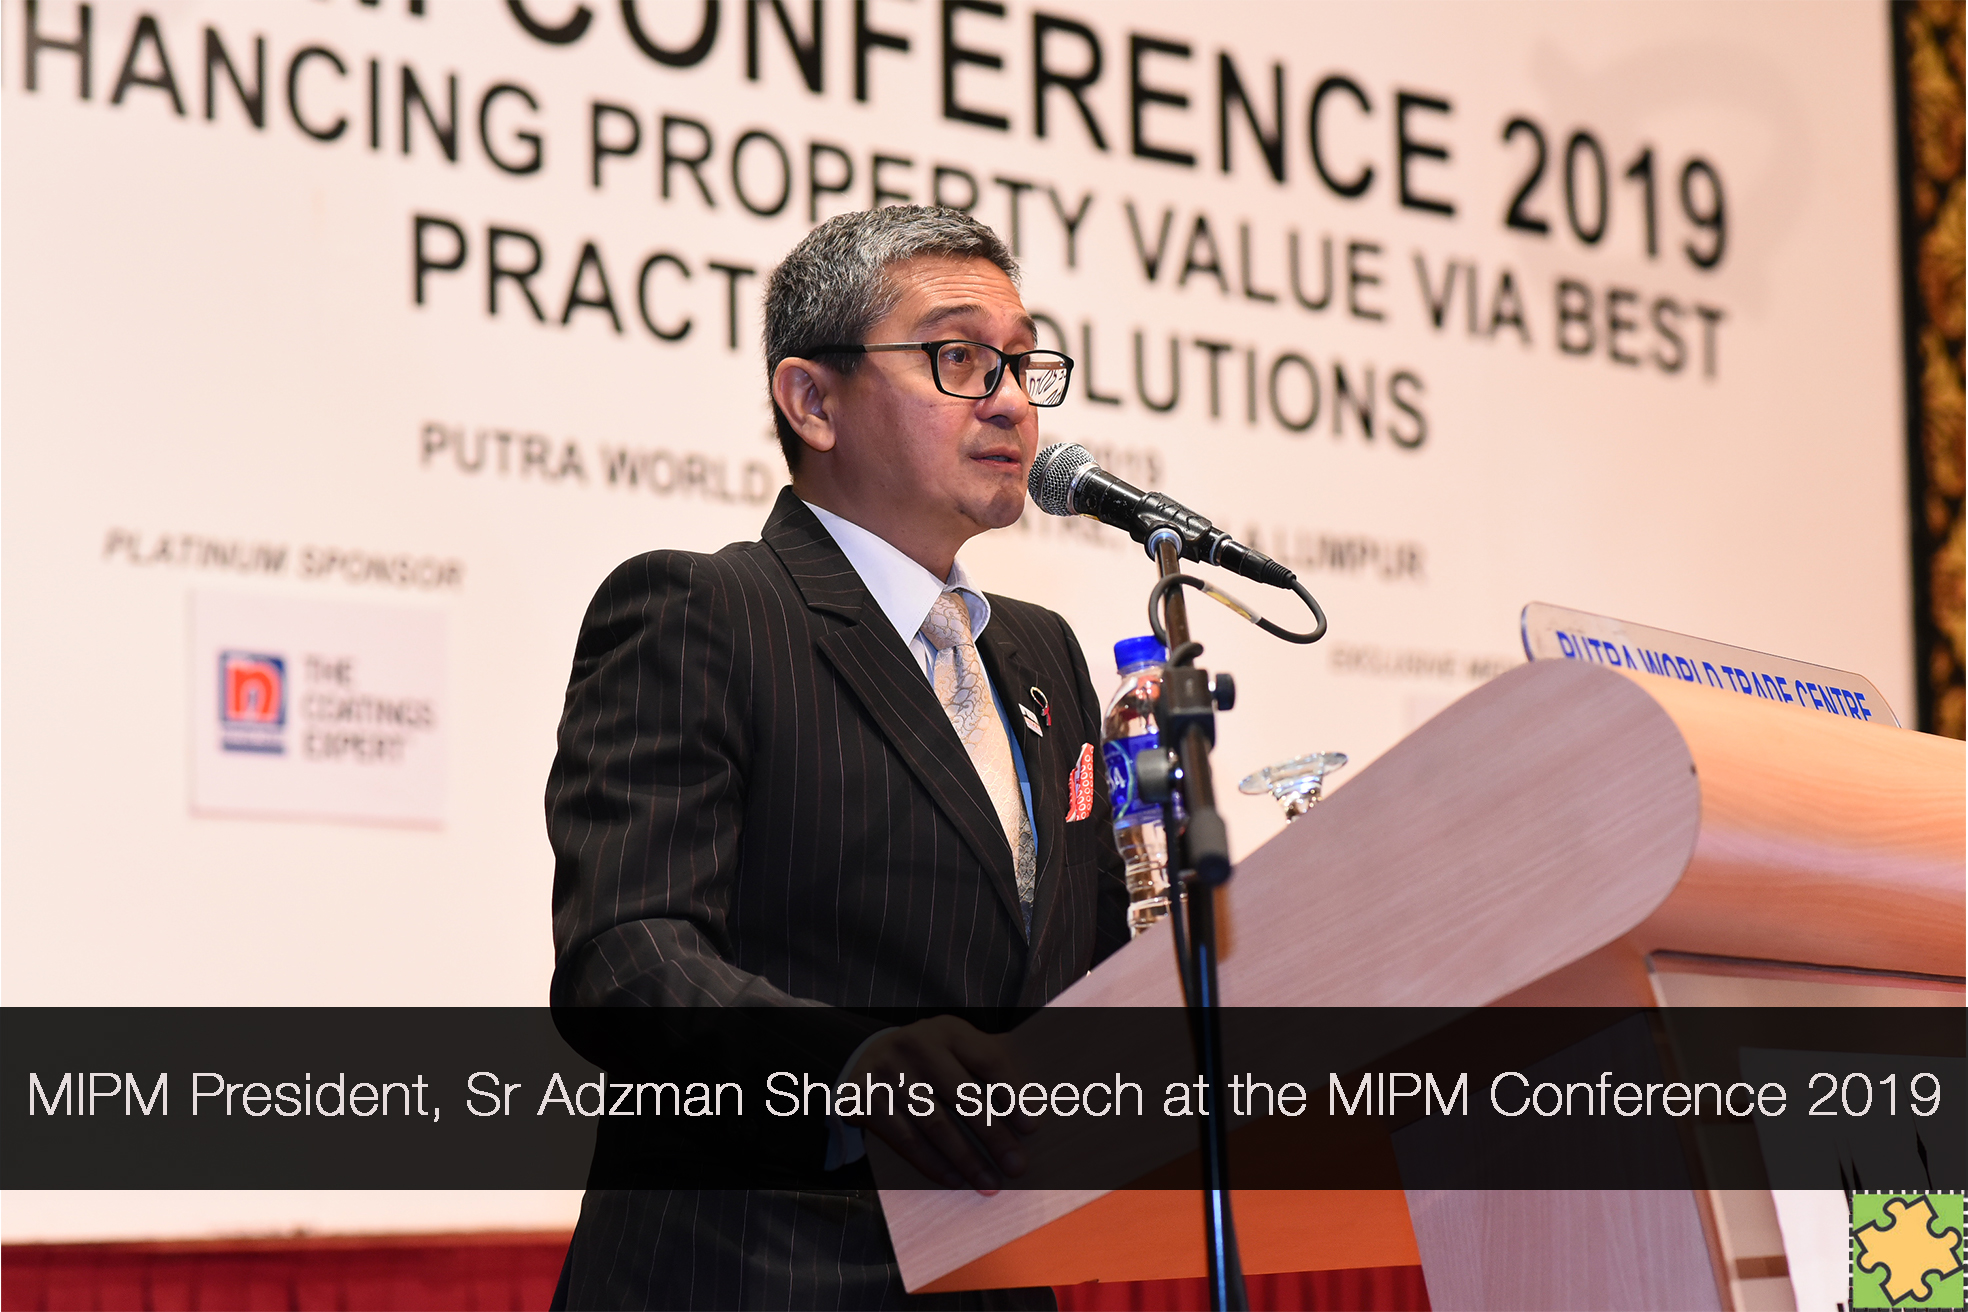 Sr Adzman Shah chair the MIPFM Conference - Enhanching Property Value Via Best Practice Solutions